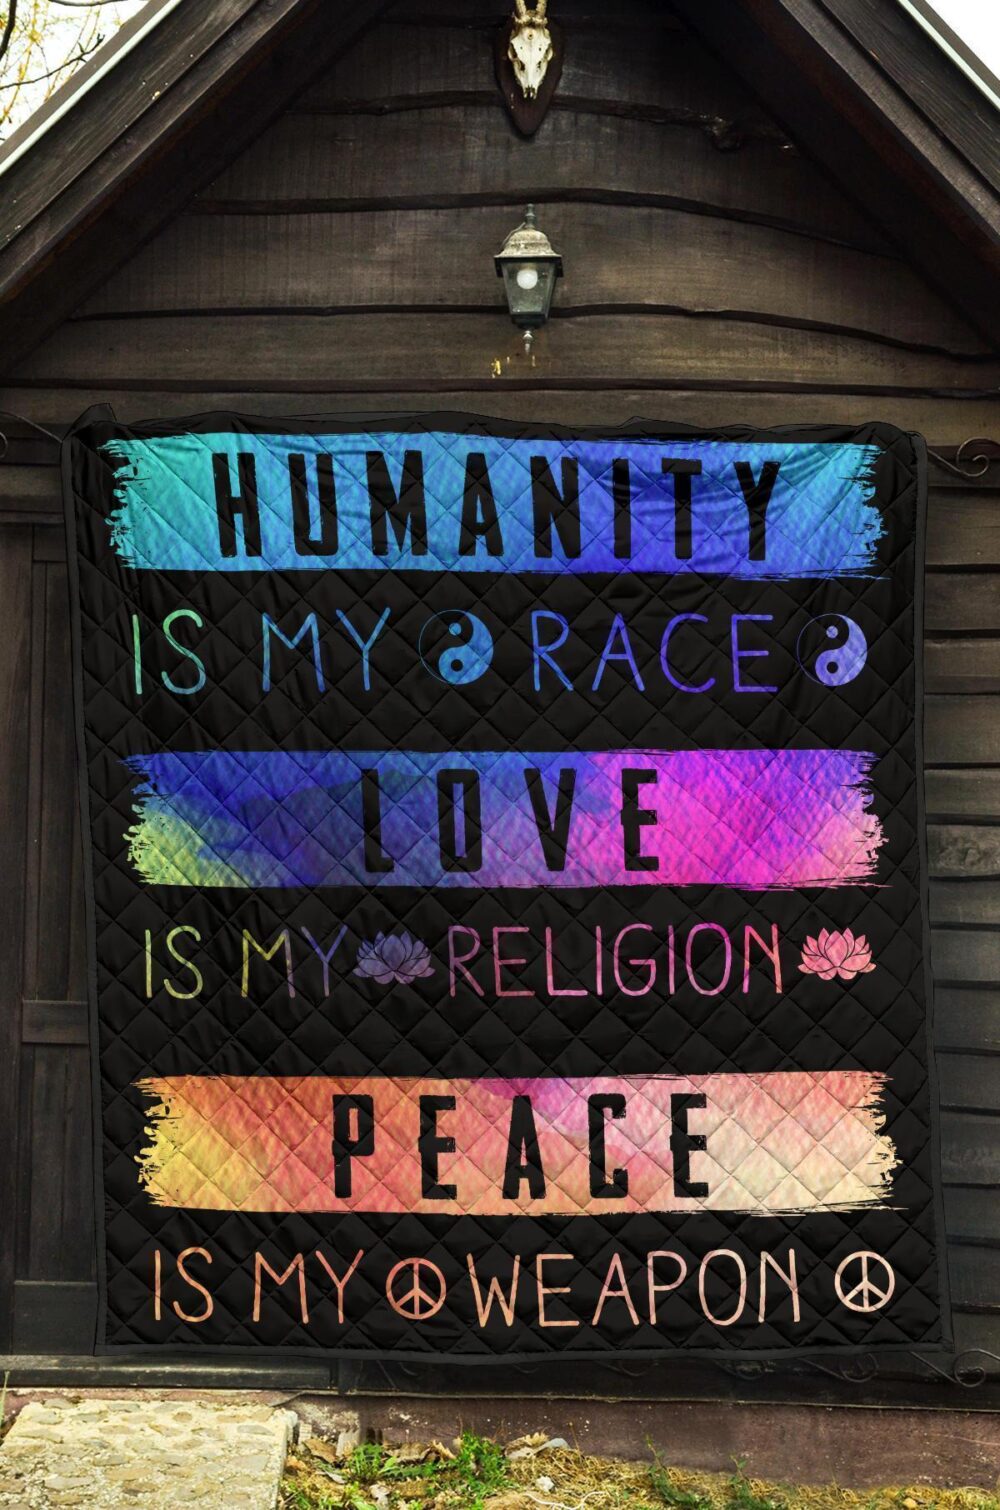 Humanity Is My Race Love and Peace Hippie Quilt Blanket Gift Idea